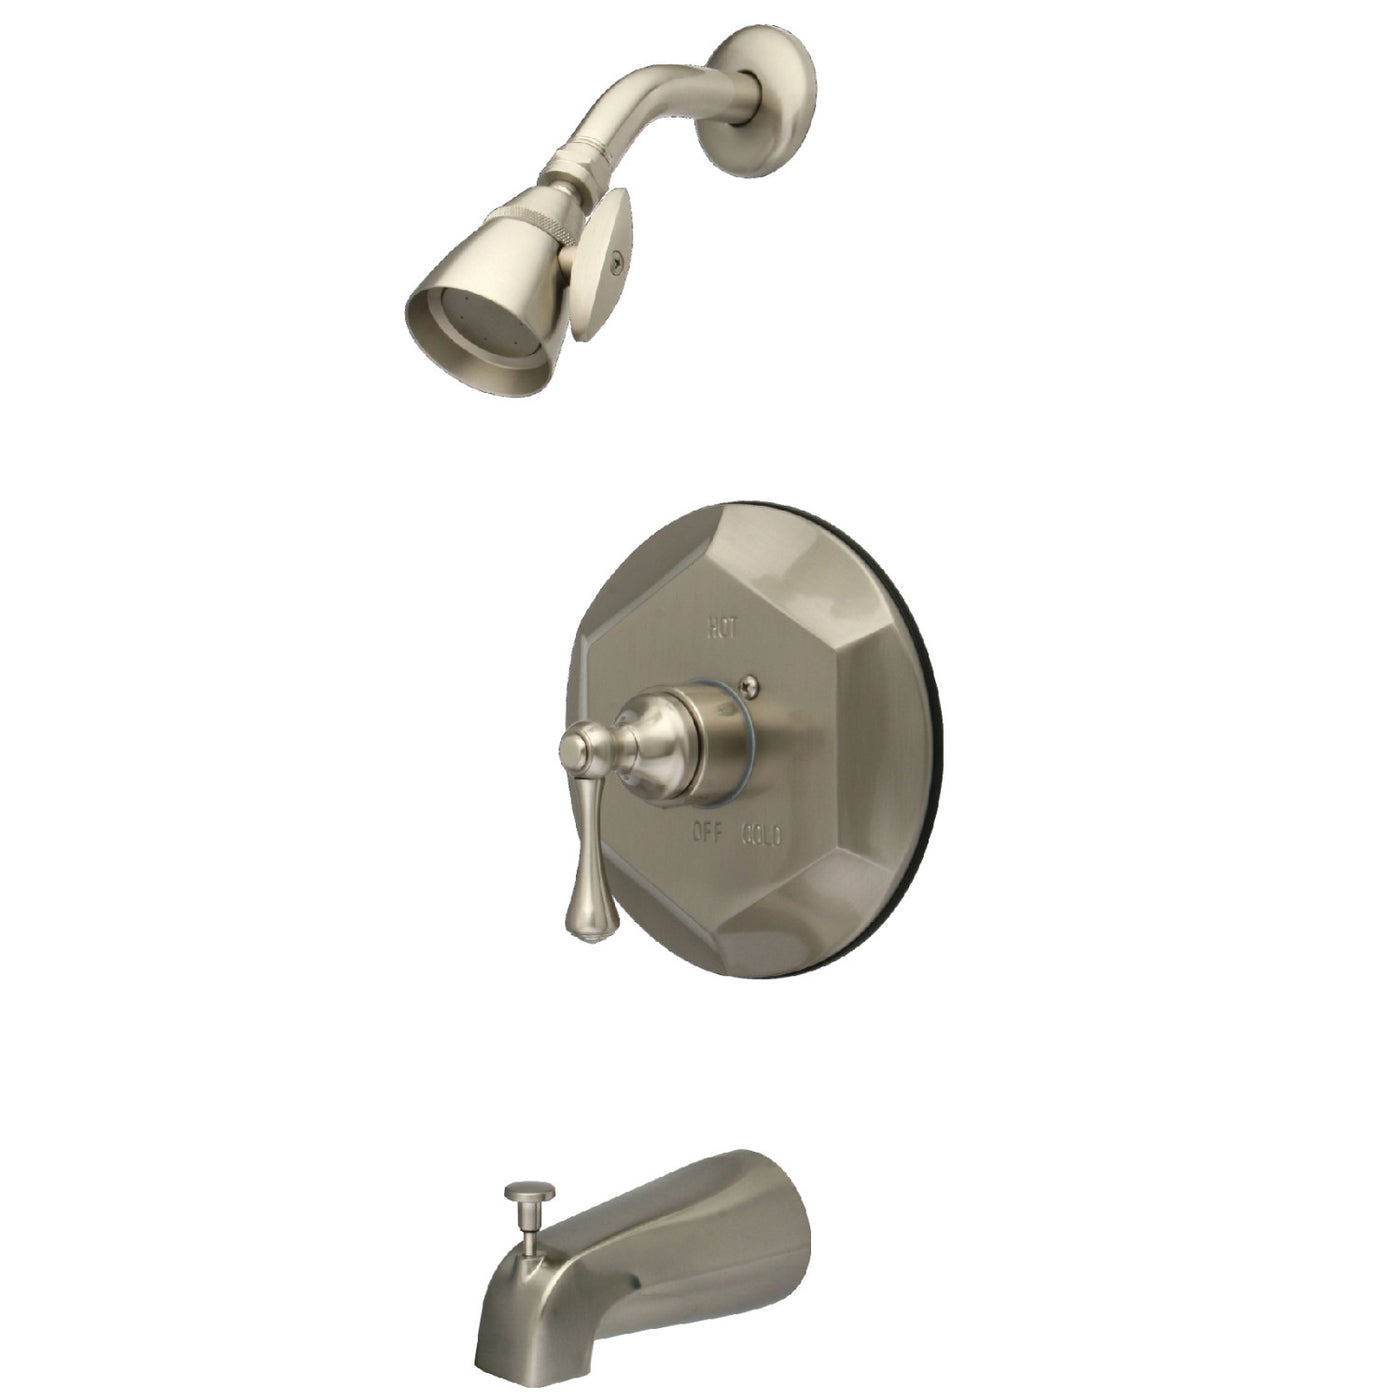 Elements of Design EB4638BL Tub and Shower Faucet, Brushed Nickel